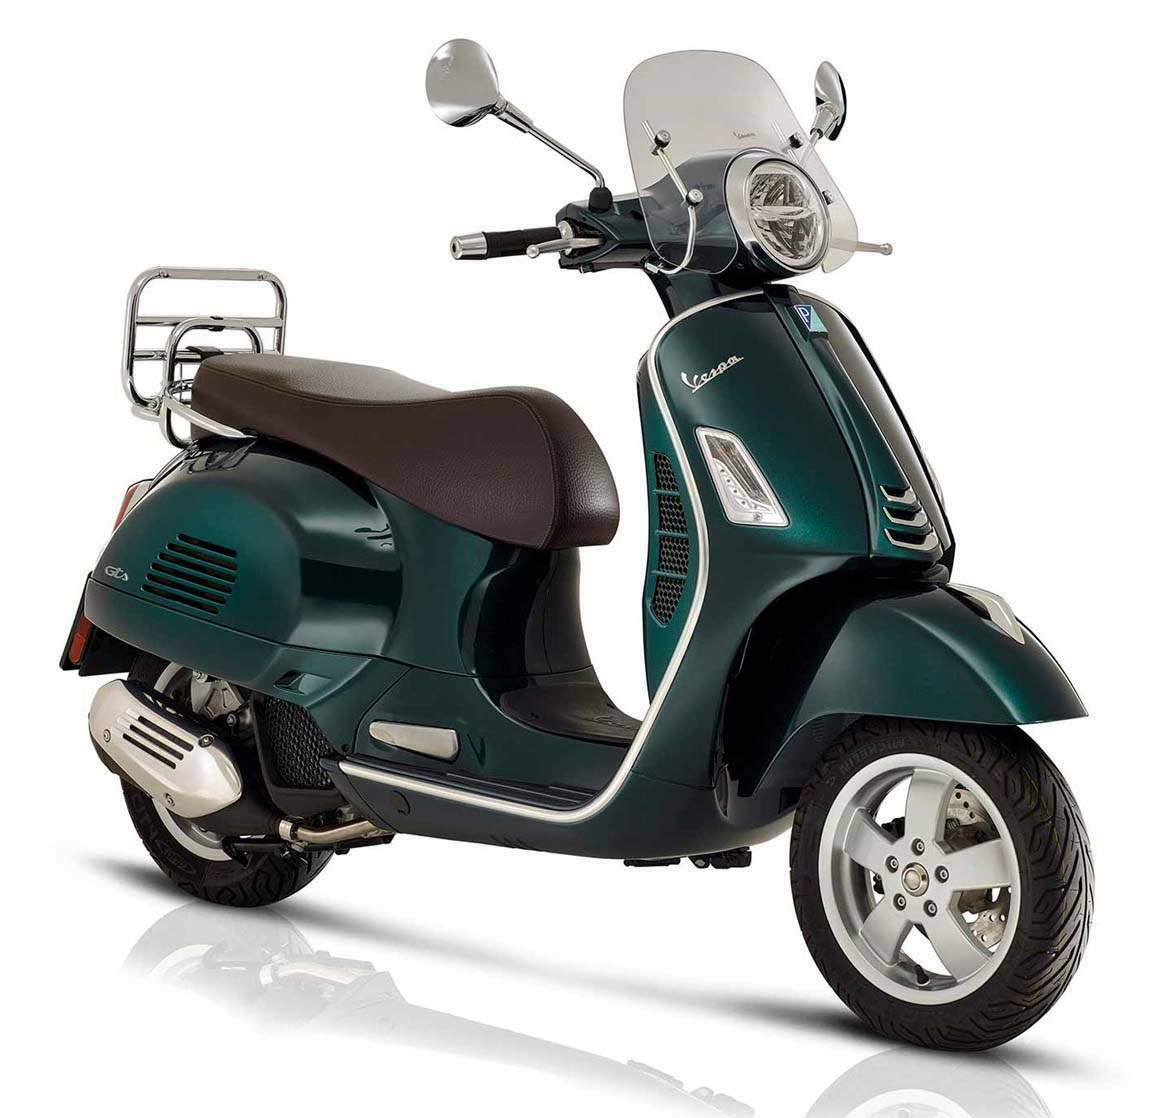 GTS 300 HPE - Better to ride a Vespa than others